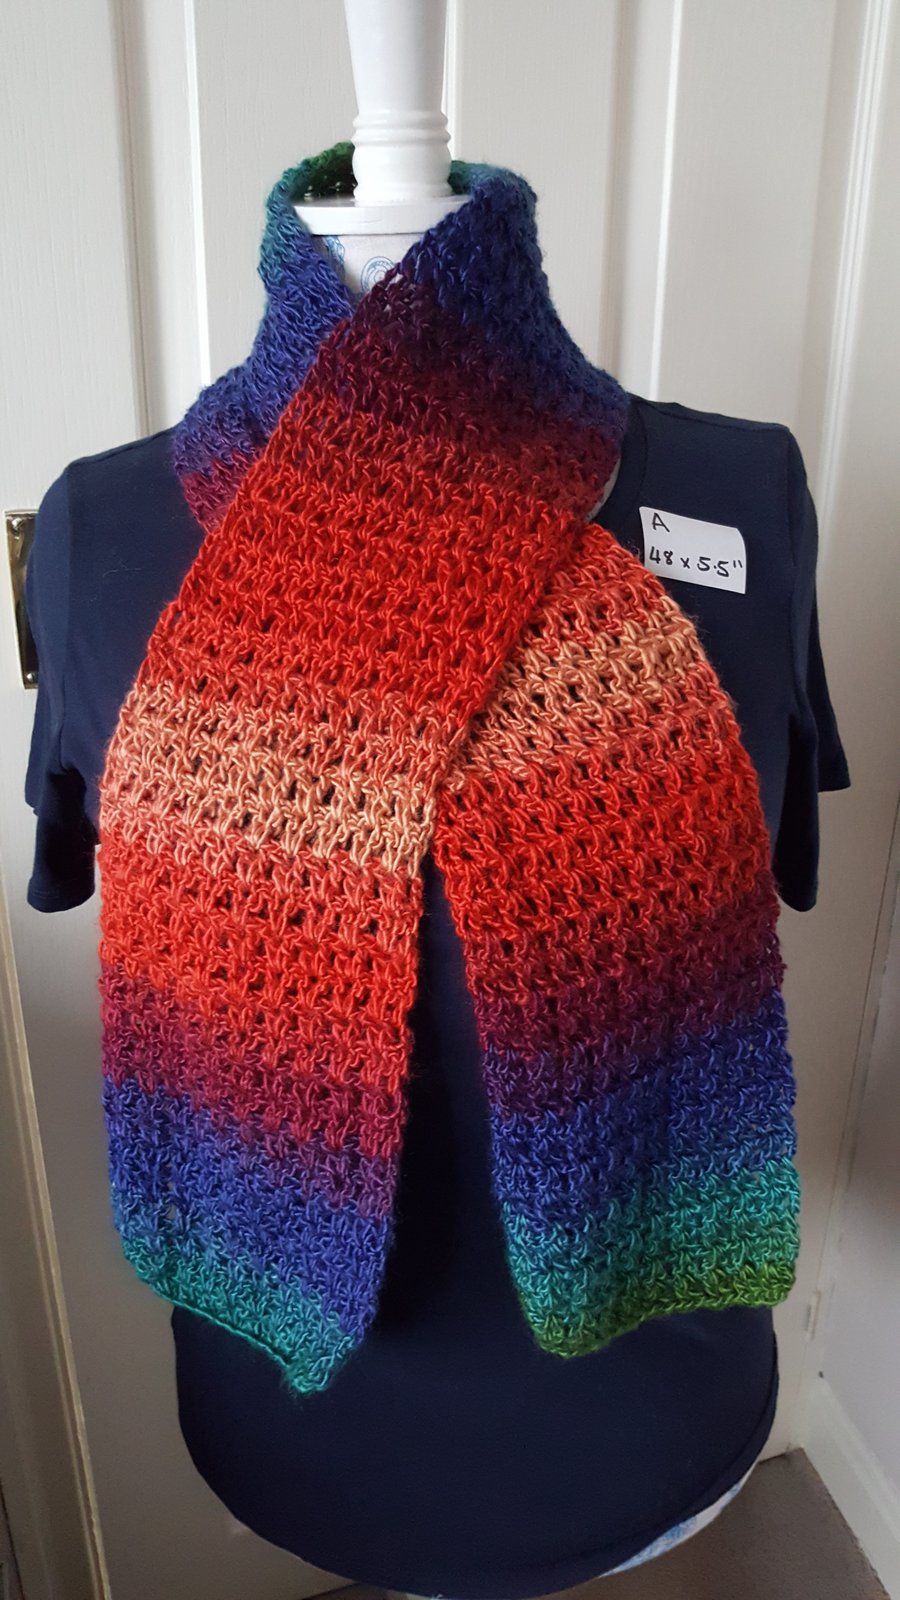 rainbow lightweight lacy crocheted scarf, 48 x 5 inches